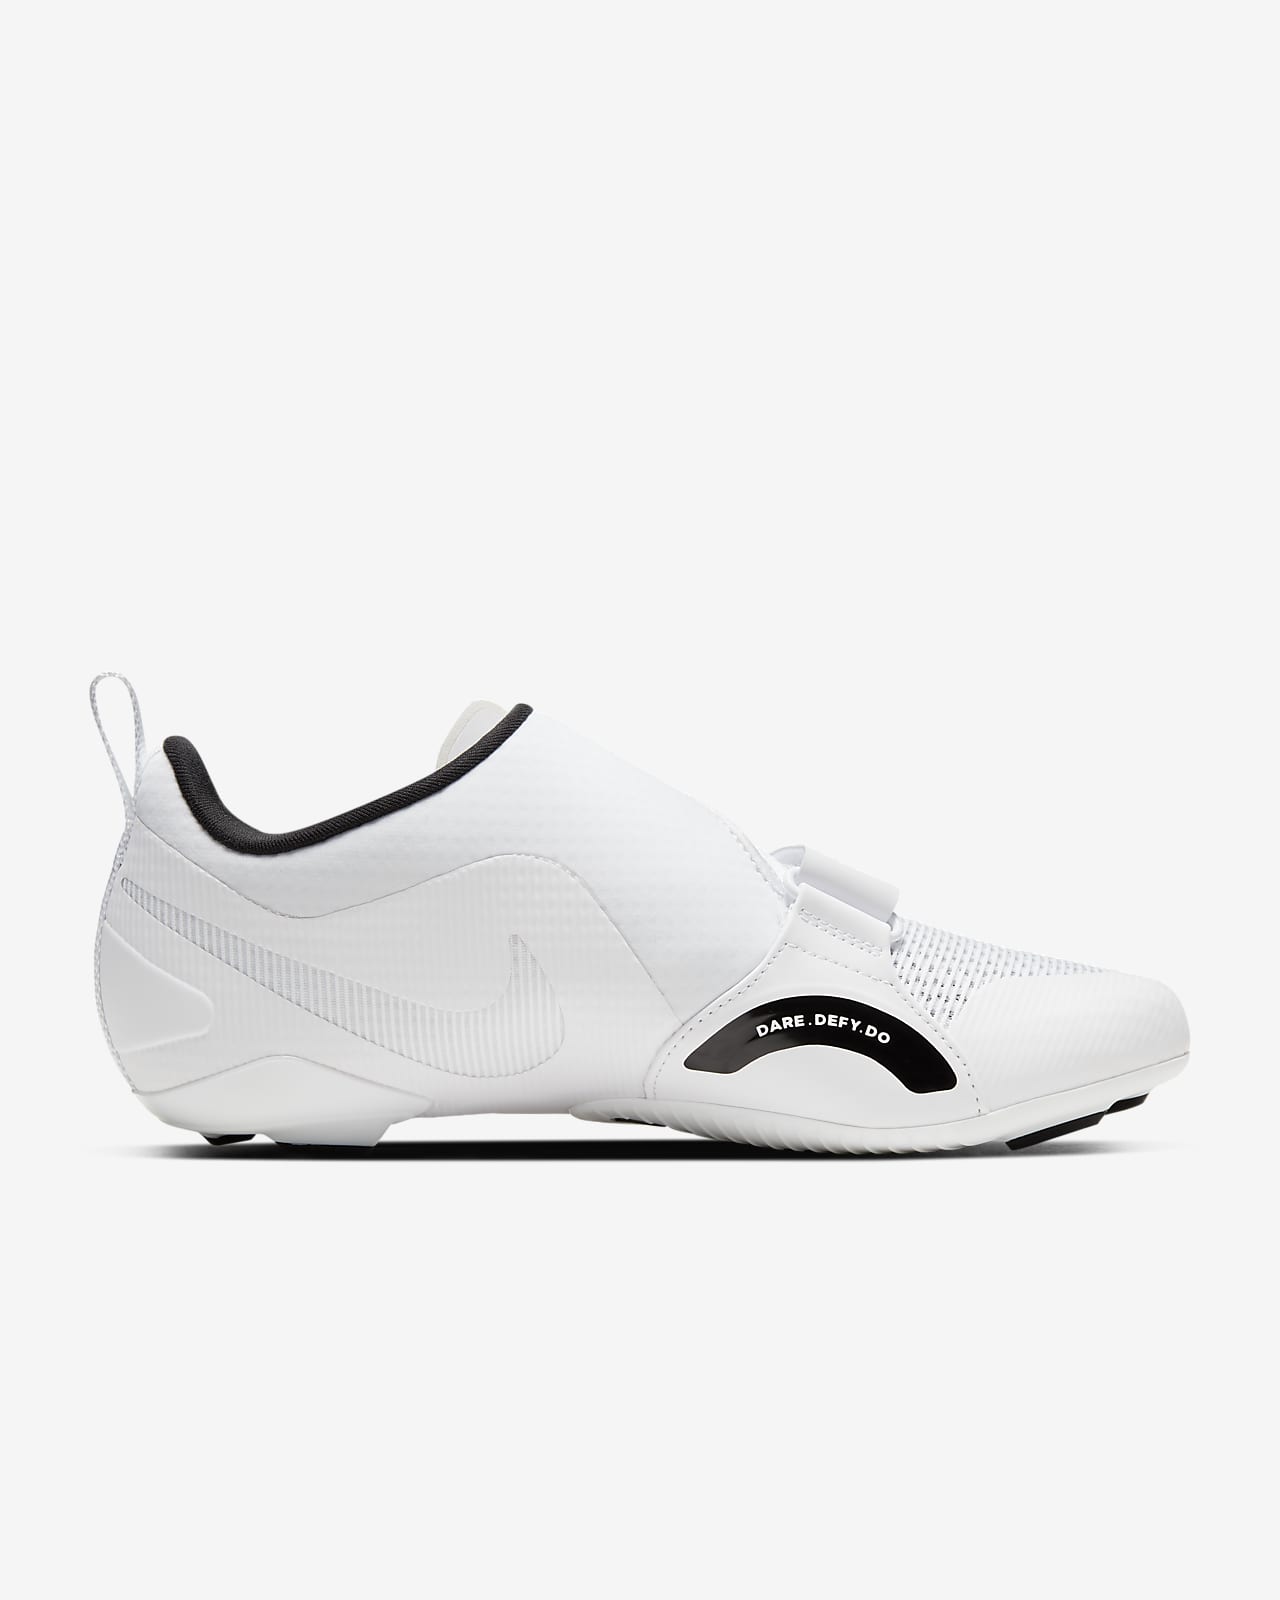 nike men's superrep cycle cycling shoes